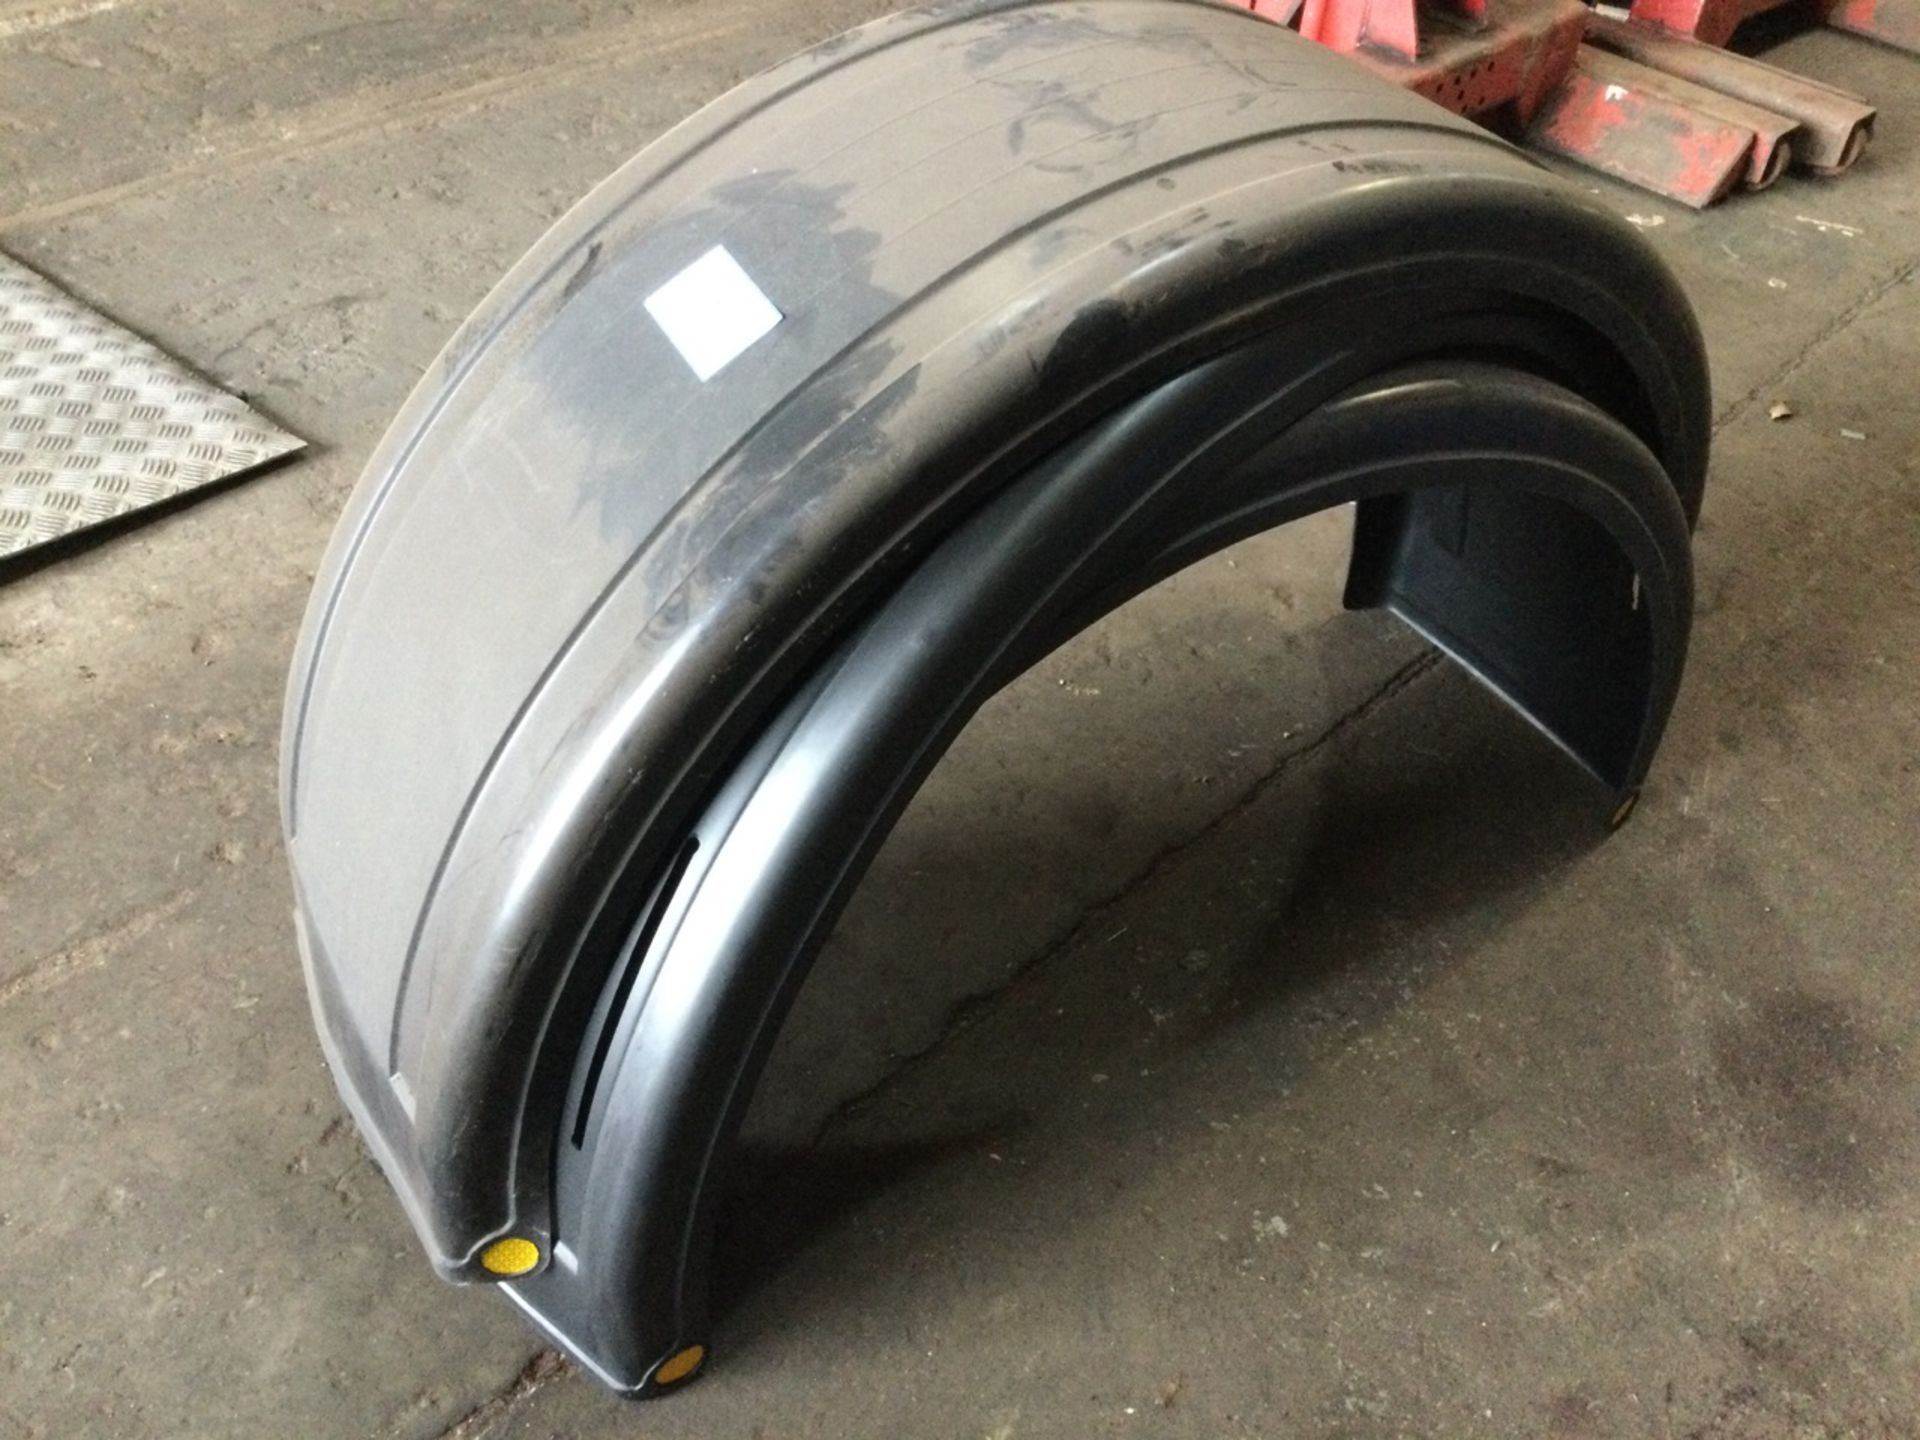 3: Plastic Truck Mudguards, Specific Type Unknown - Image 2 of 2